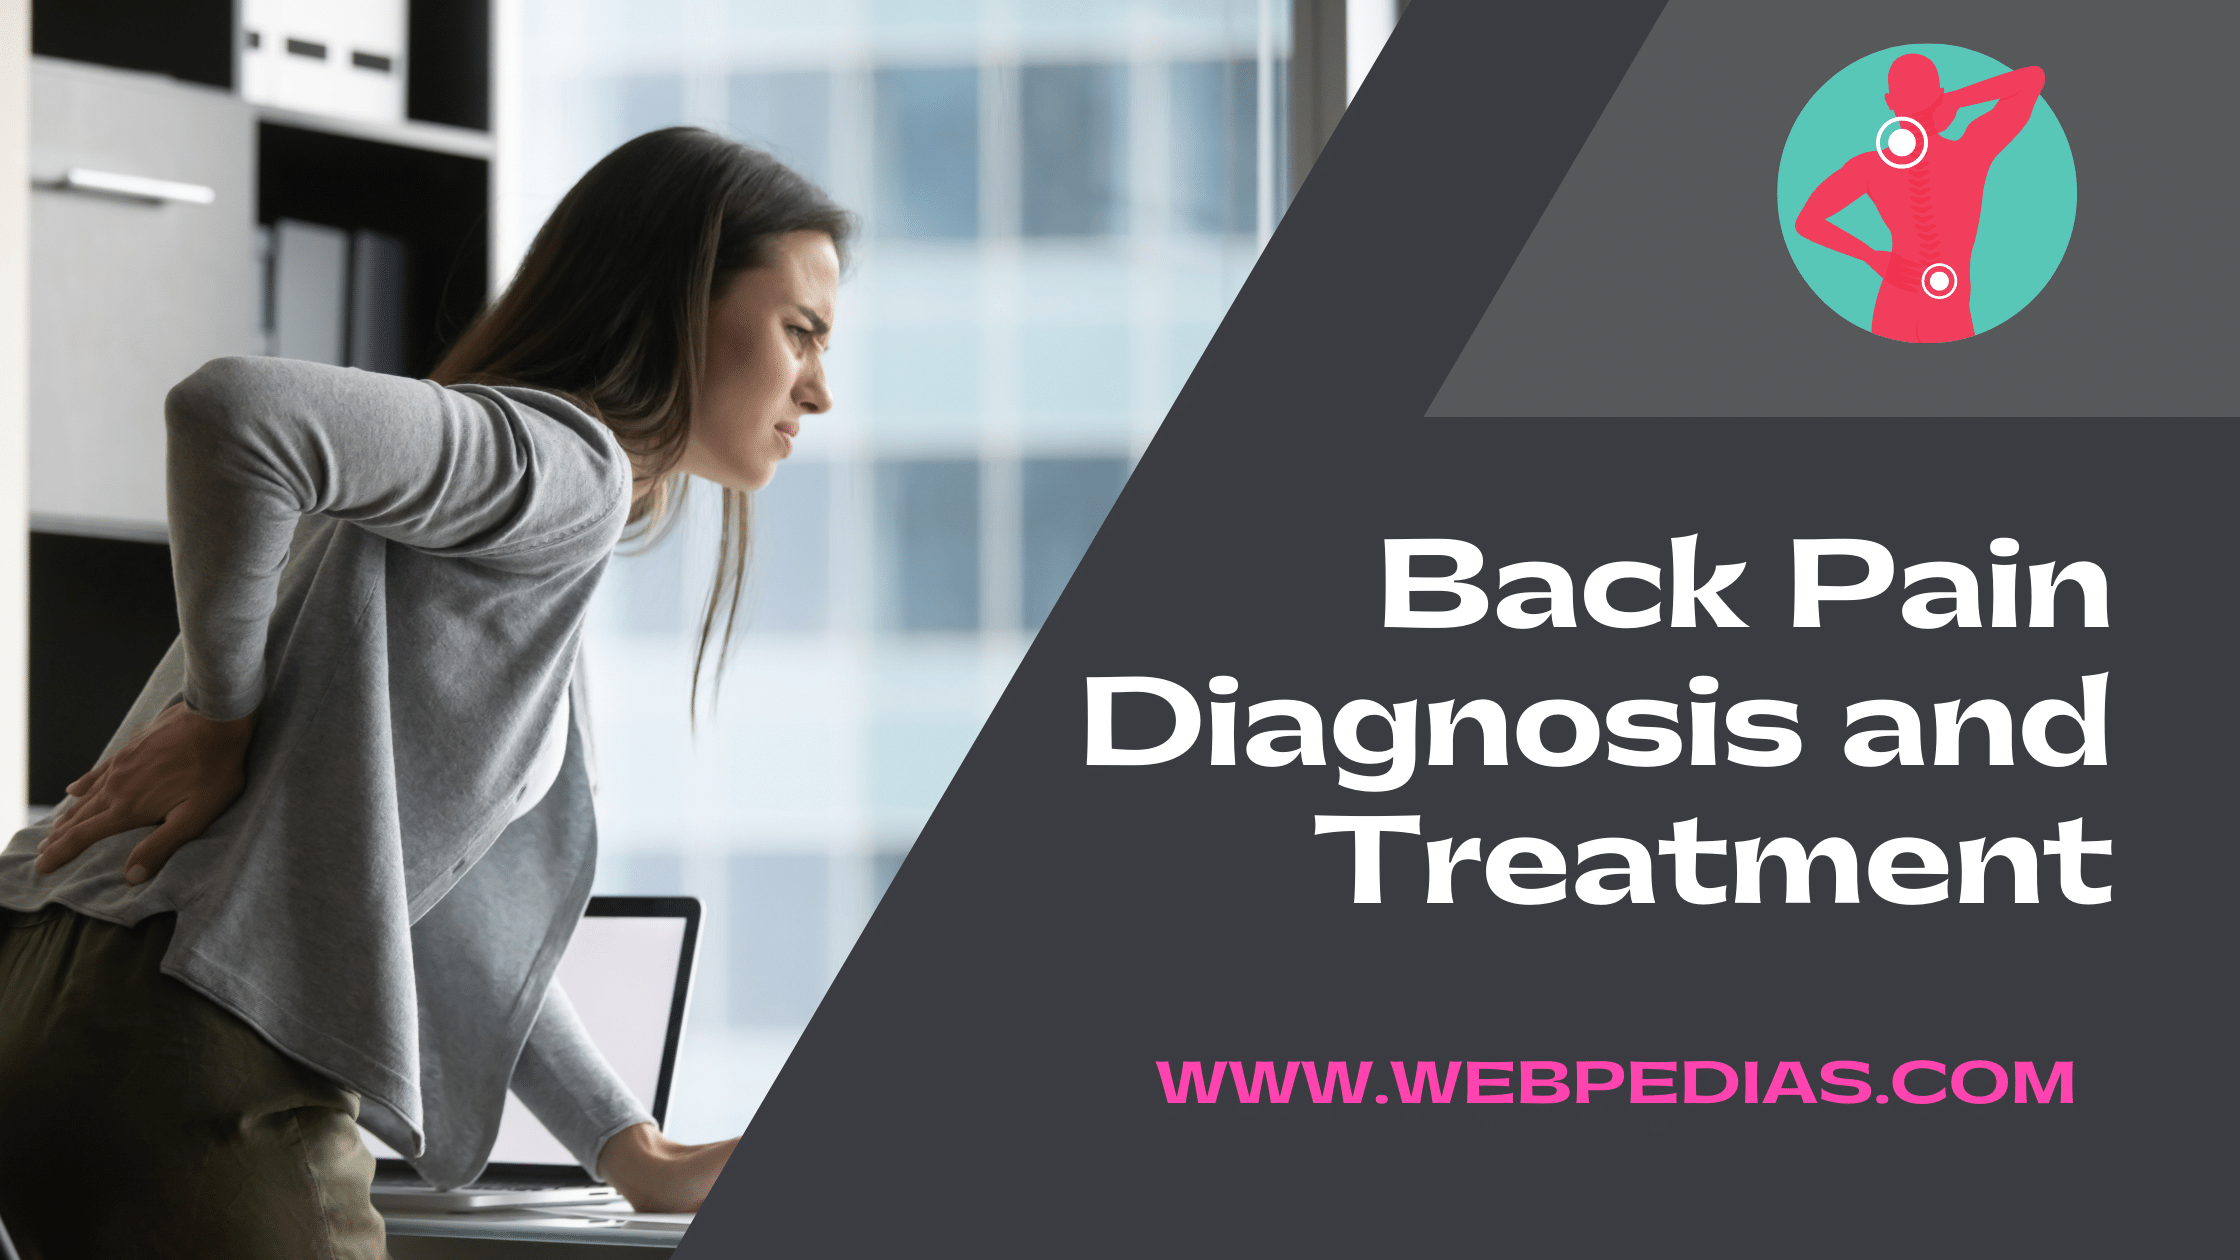 Back Pain Diagnosis and Treatment